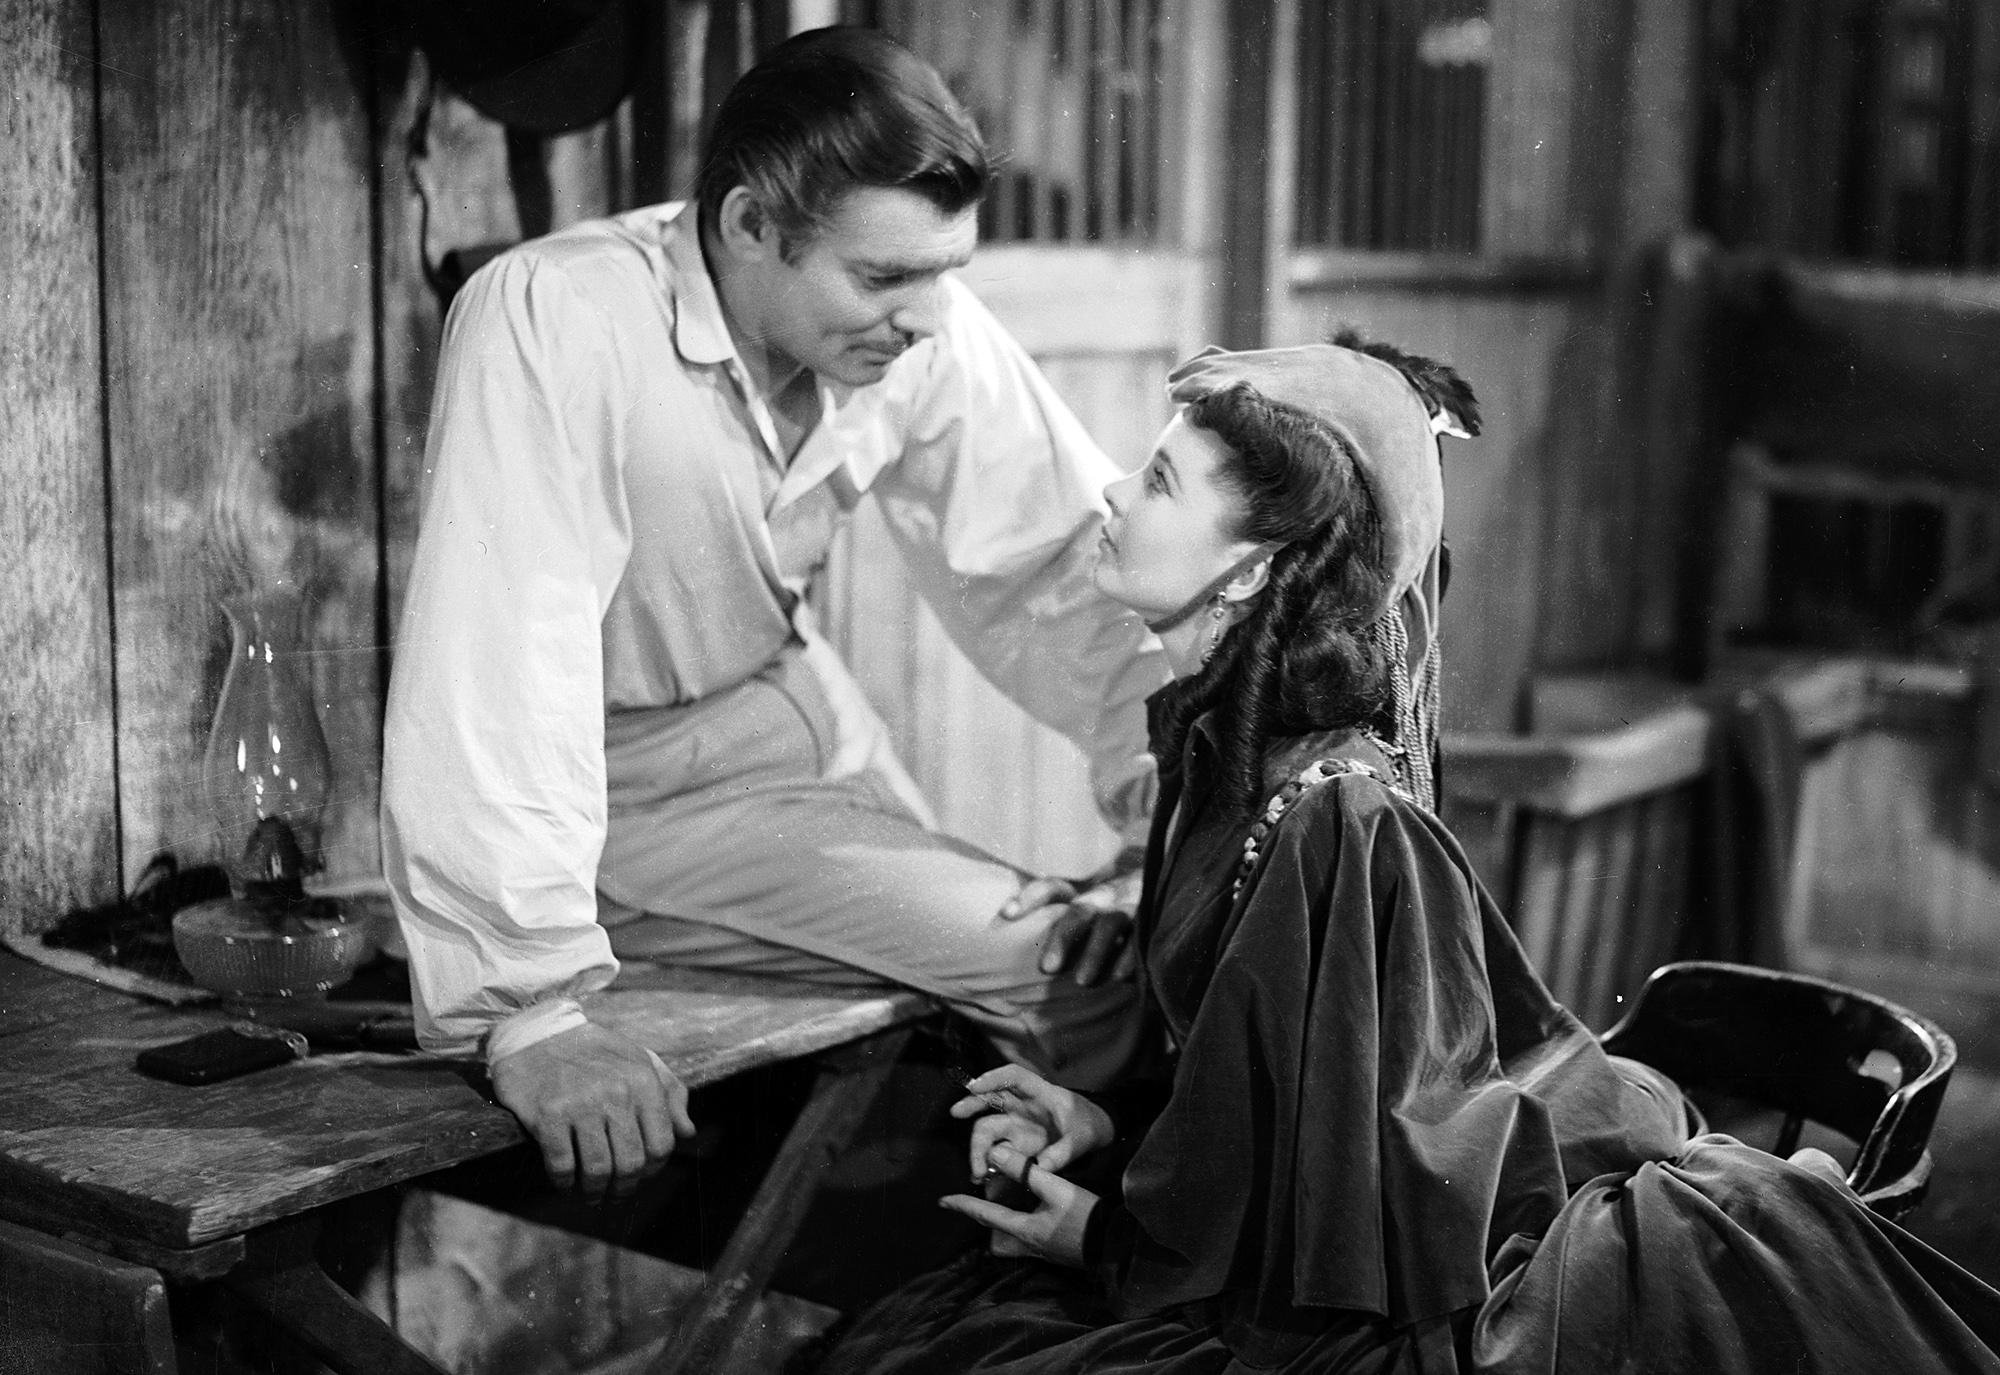 Clark Gable and Vivien Leigh star in “Gone With the Wind.”